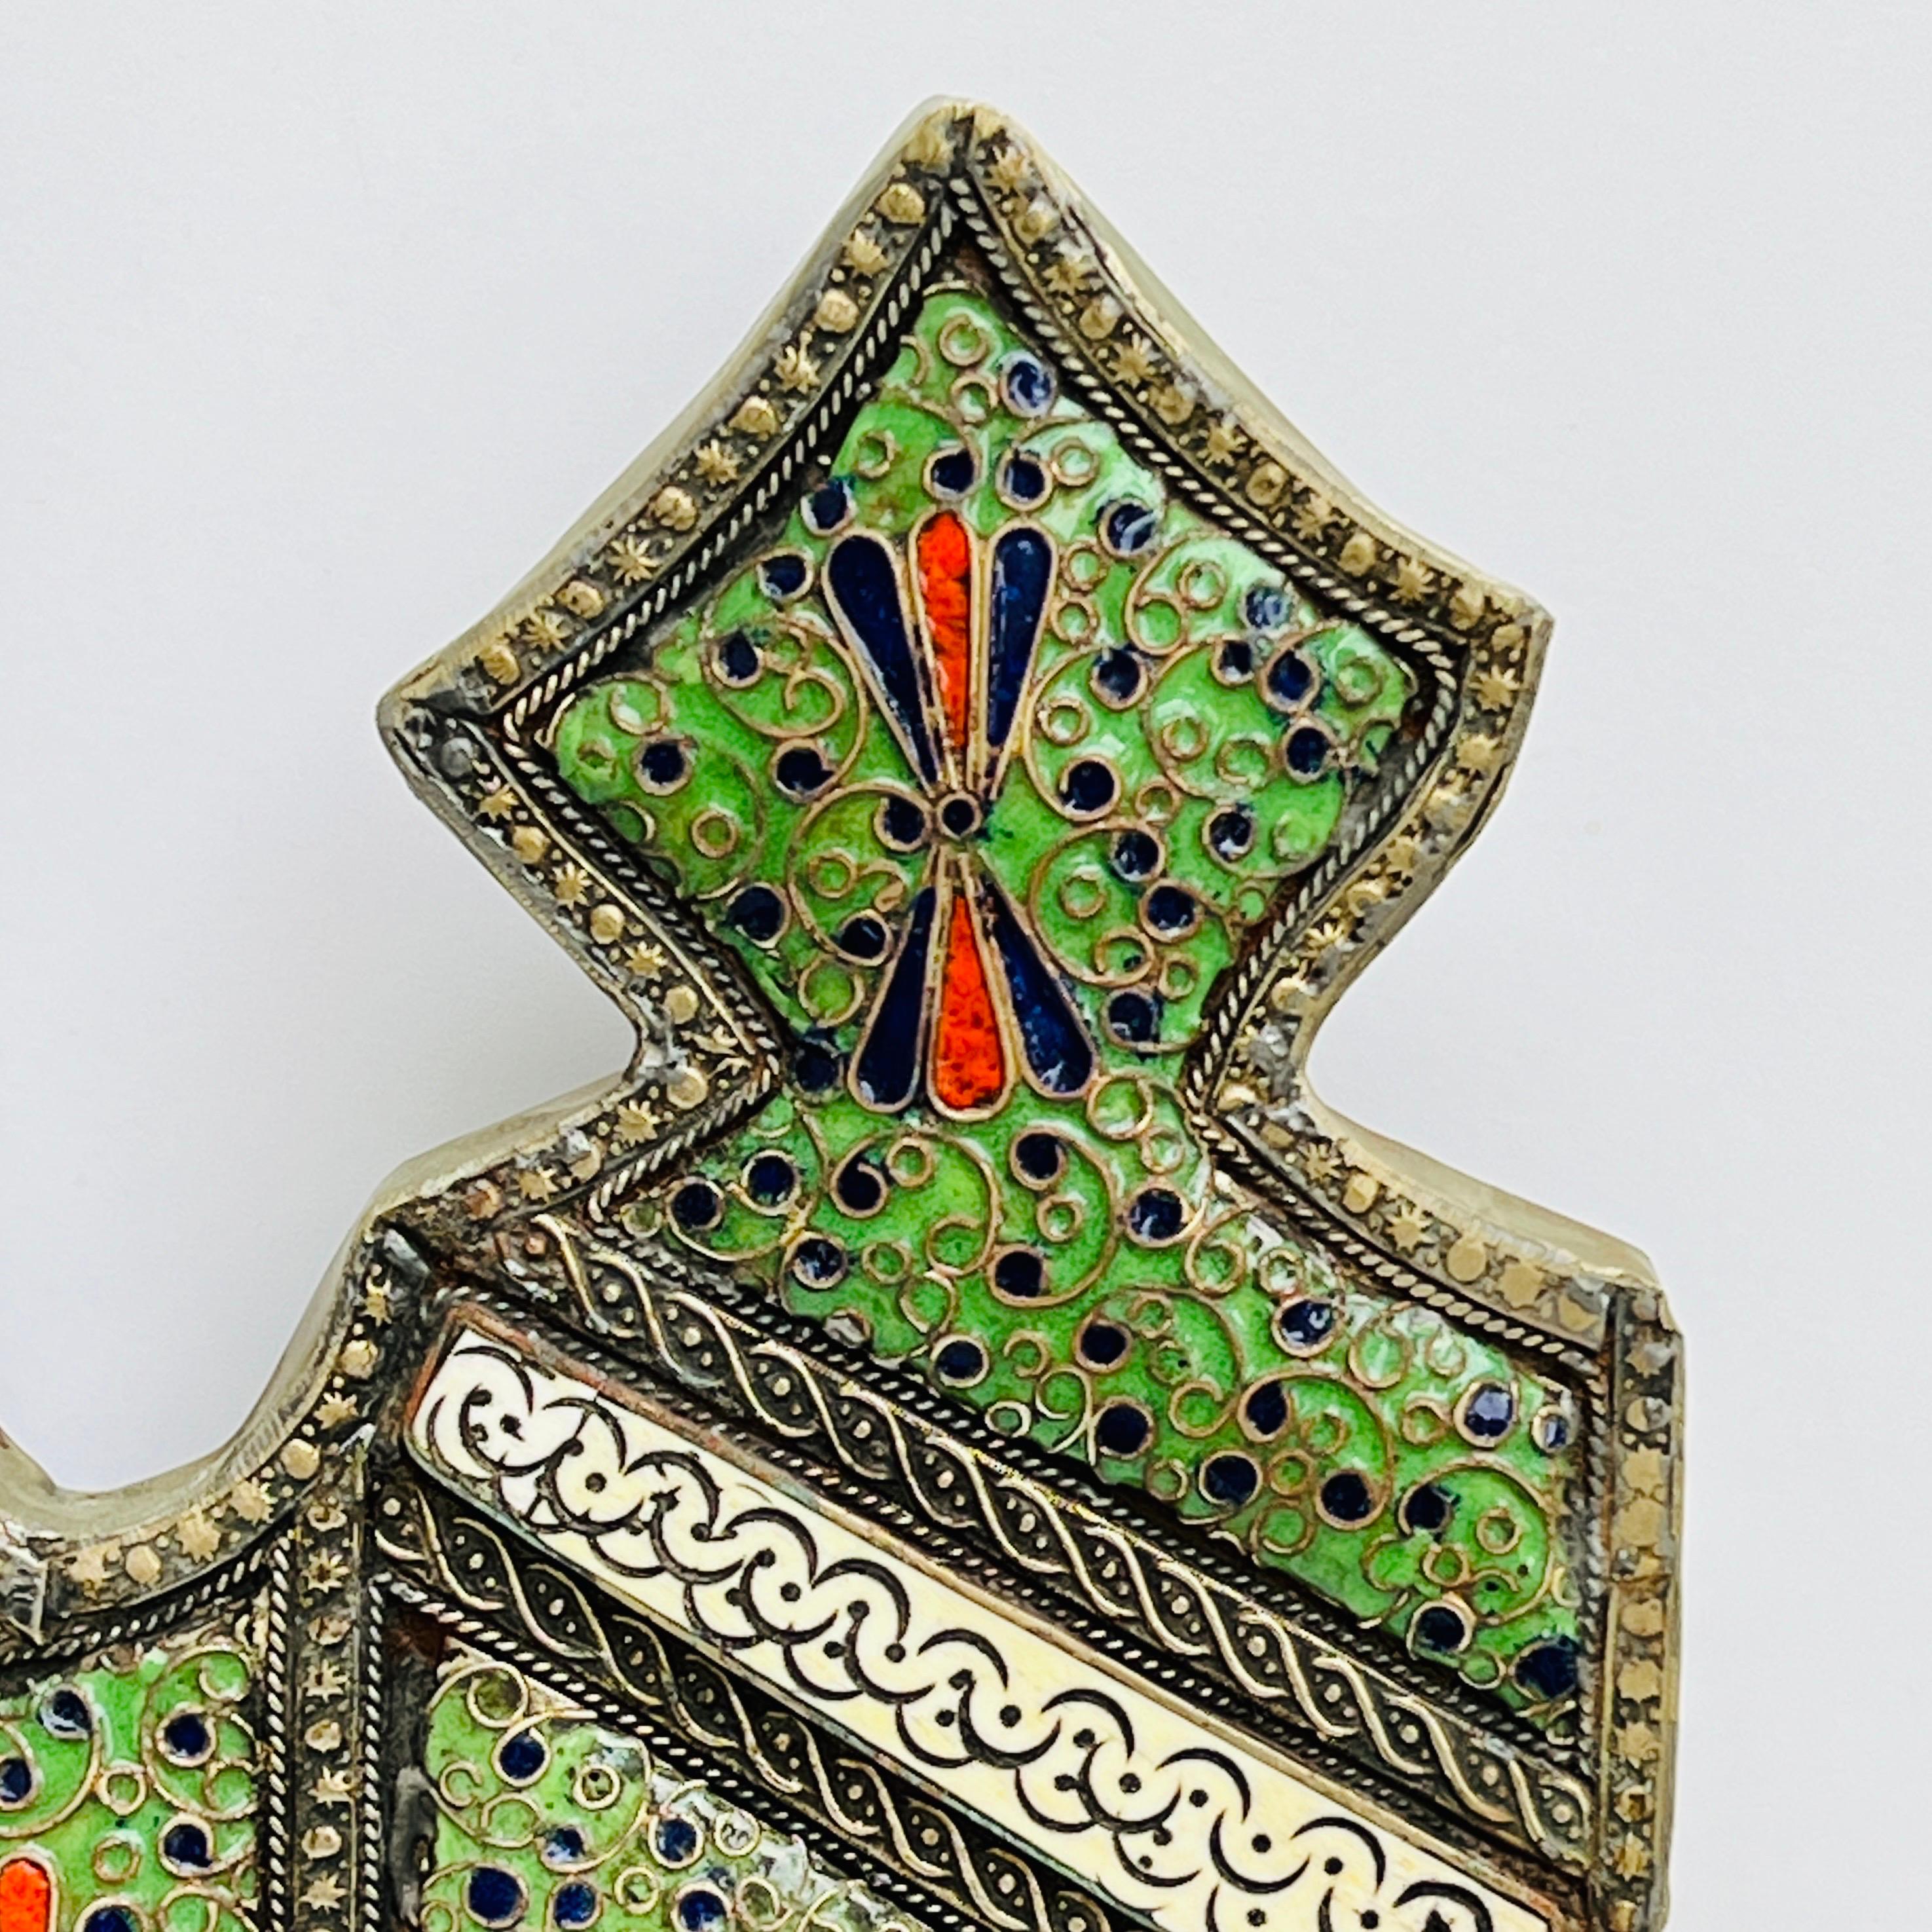 Moroccan Moorish Arch Mirror in Enameled Cloisonné with Bone Inlays, Morocco c. 1950's For Sale